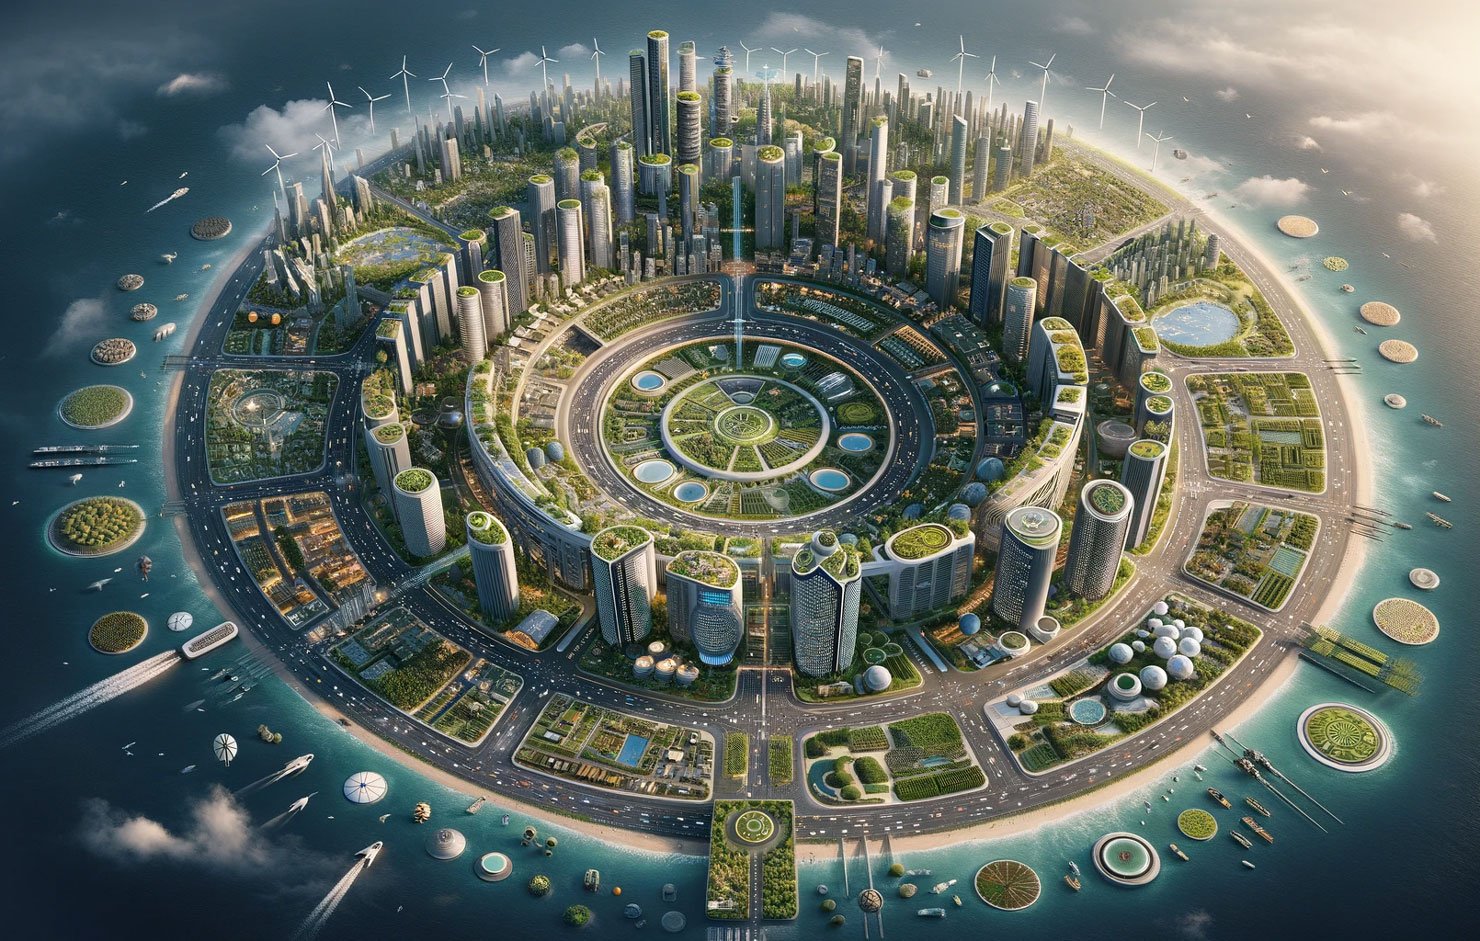 angz-revolutionizing-city-concept-and-urban-planning